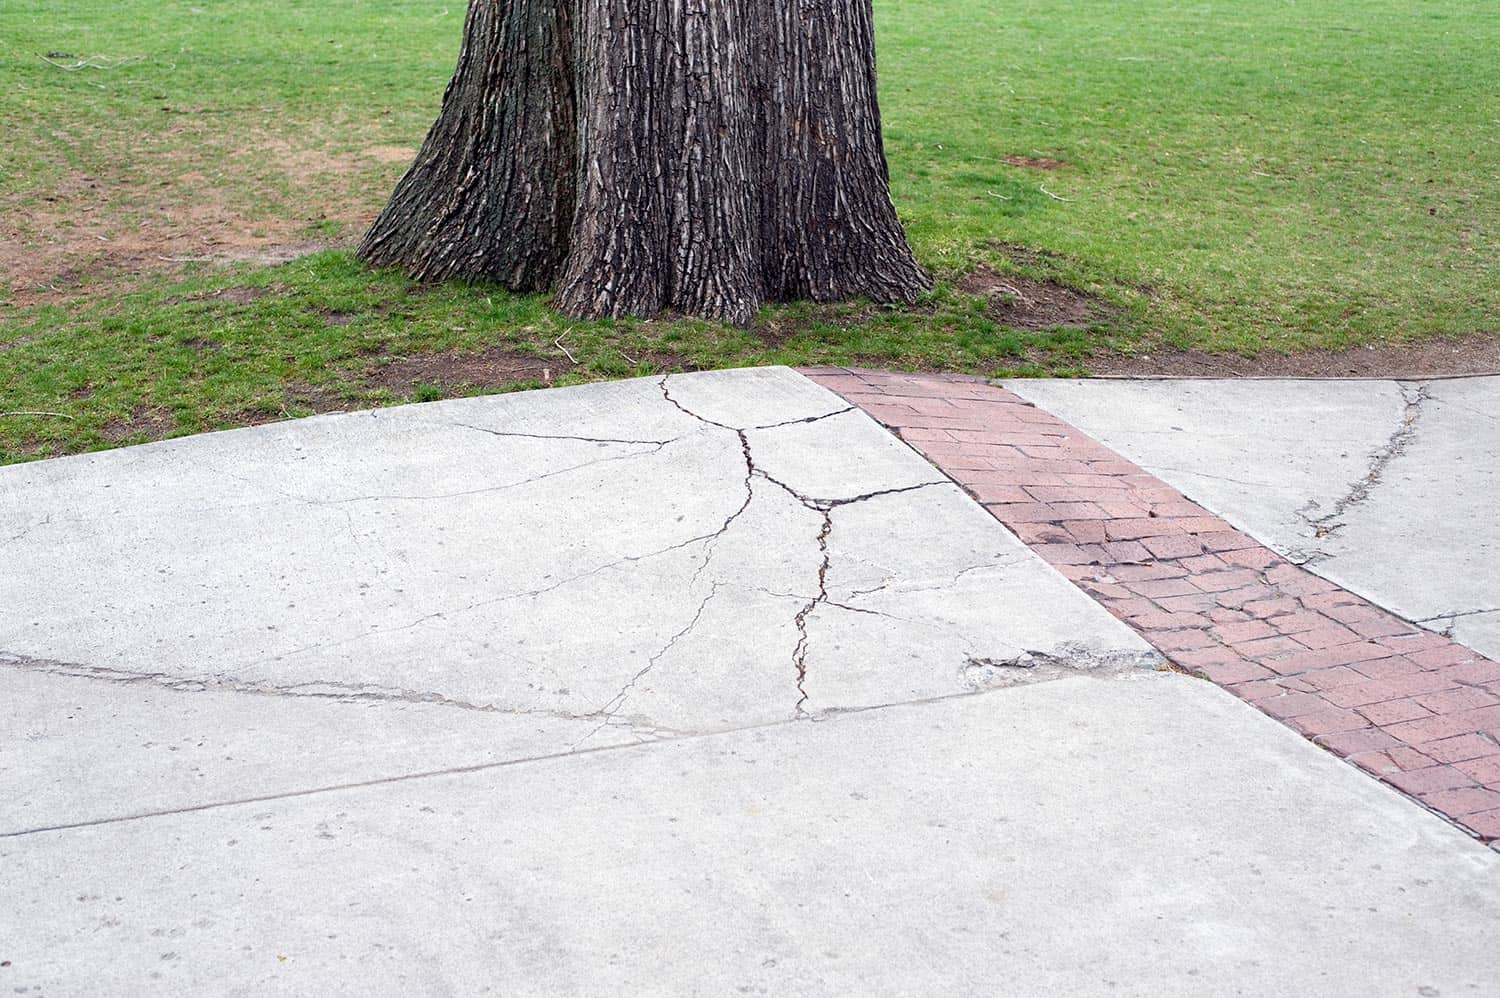 A concrete walkway is cracked and lifted up by the roots of a growing tree